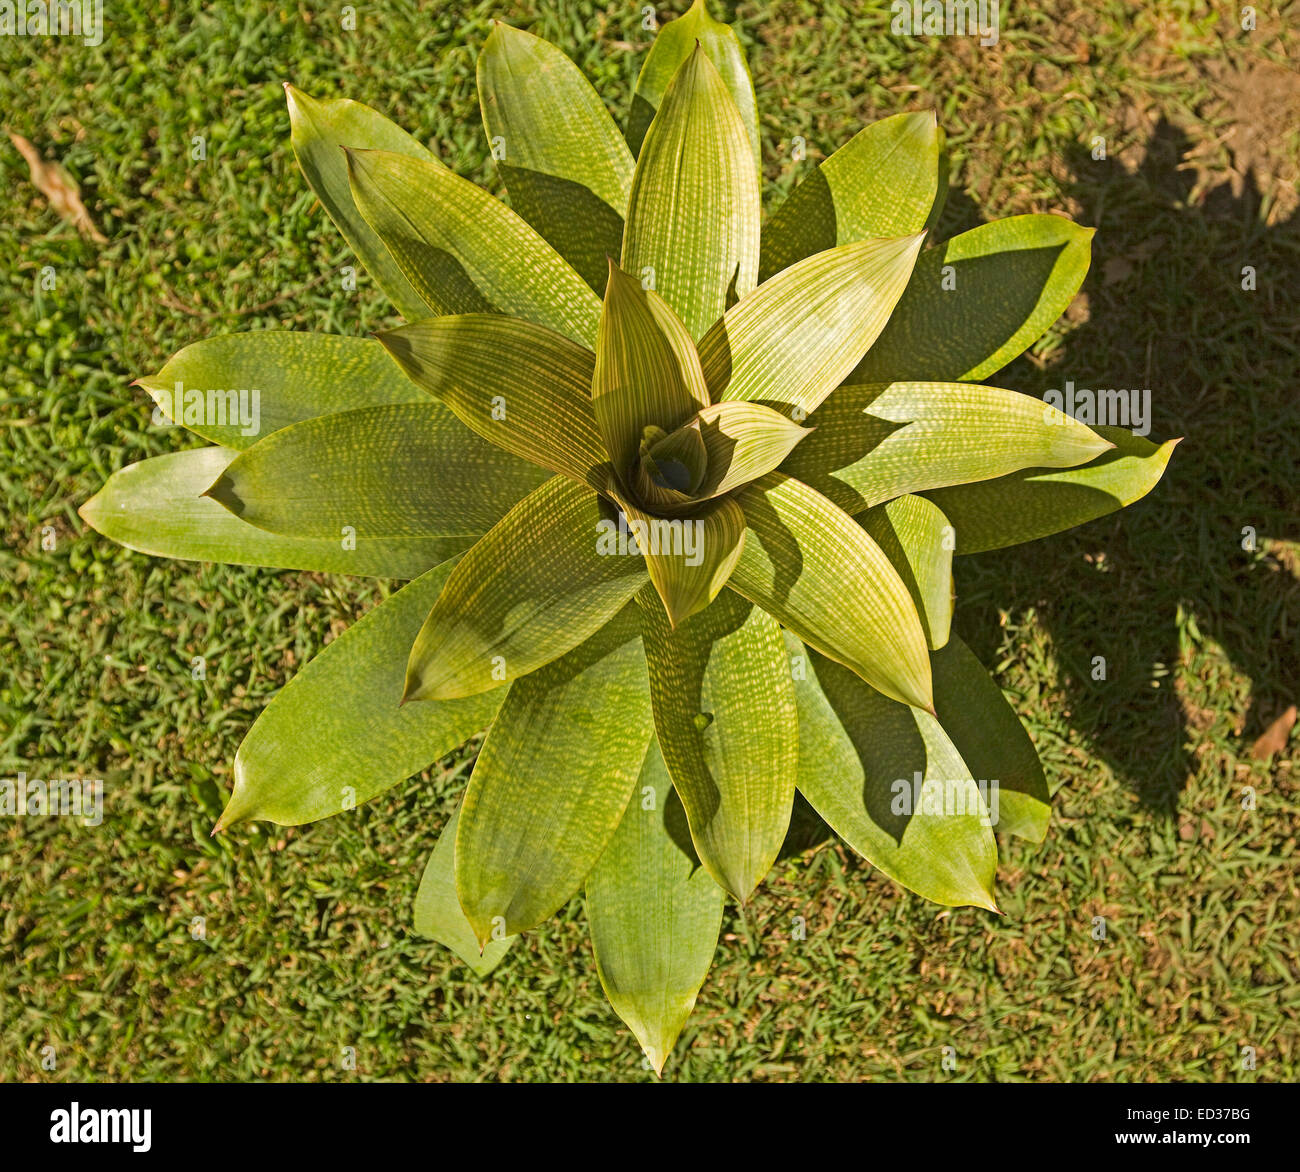 Bromeliad, Vriesea gigantea, with large light green leaves with narrow green stripes and tinged with yellow Stock Photo